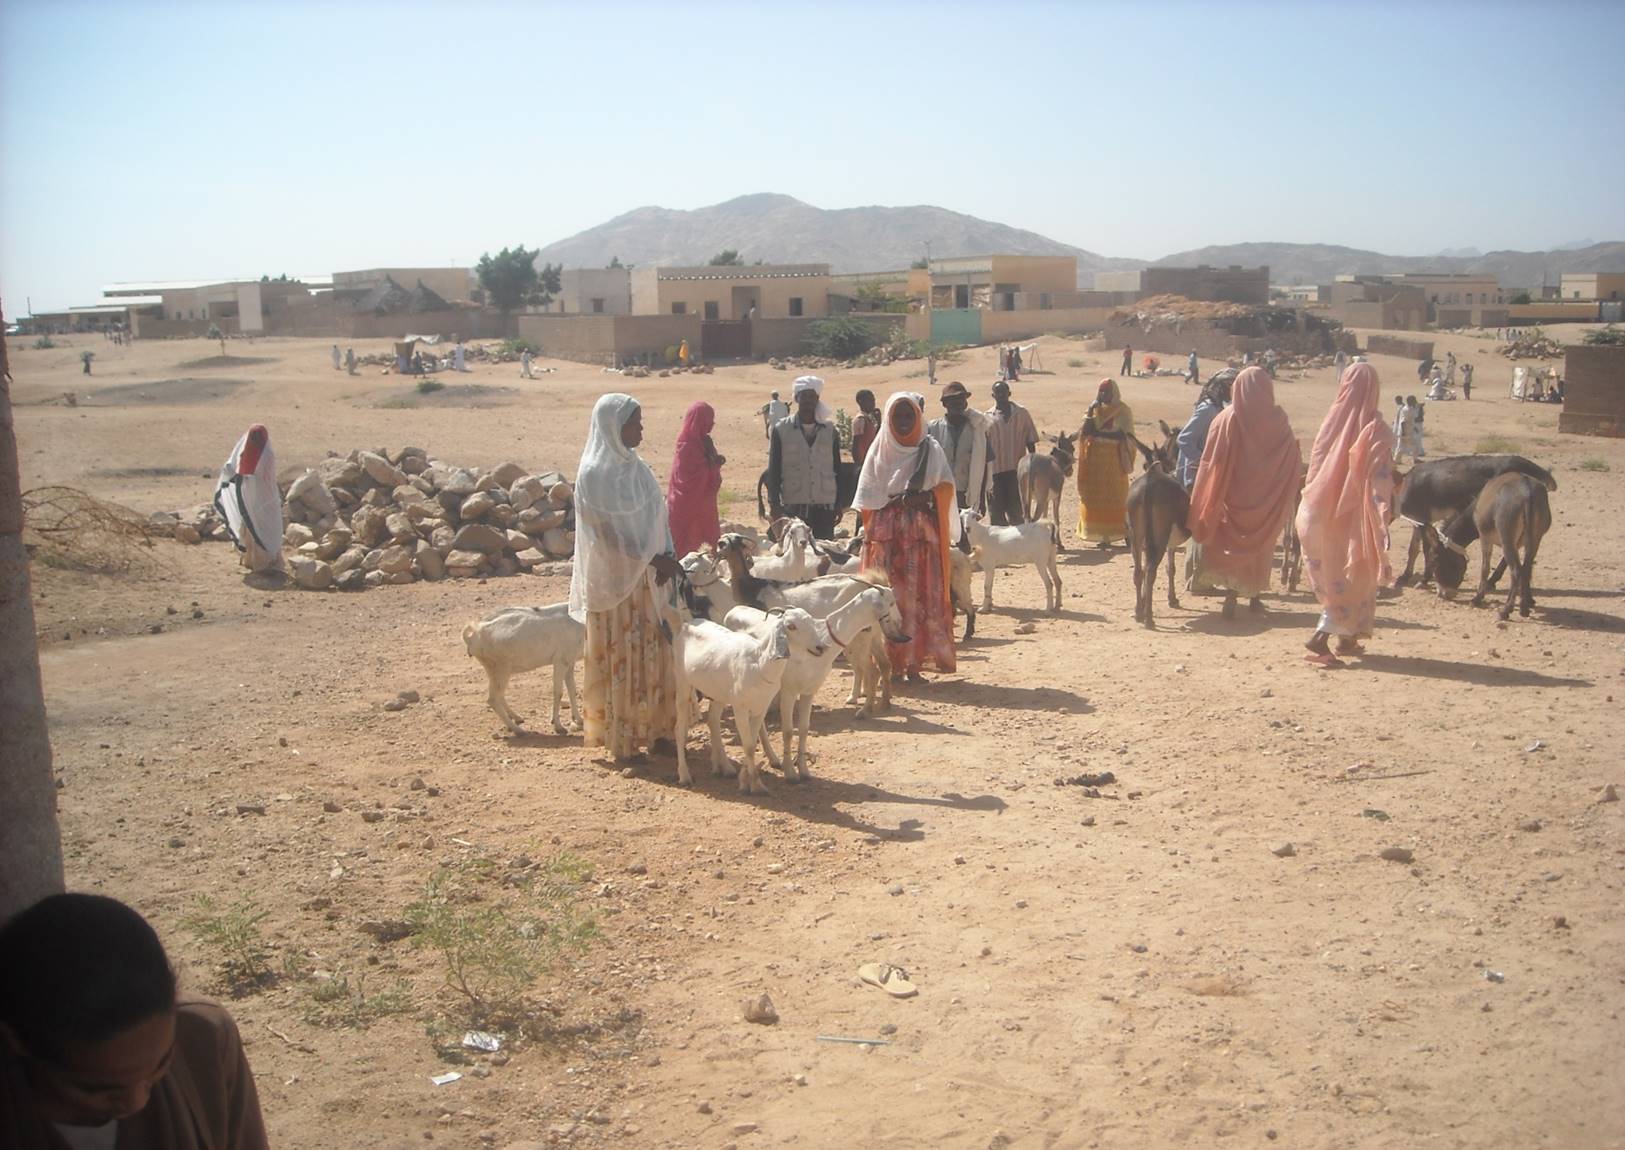 Livestock prograWeaving trainingm, offering goats and chickens to female headed families